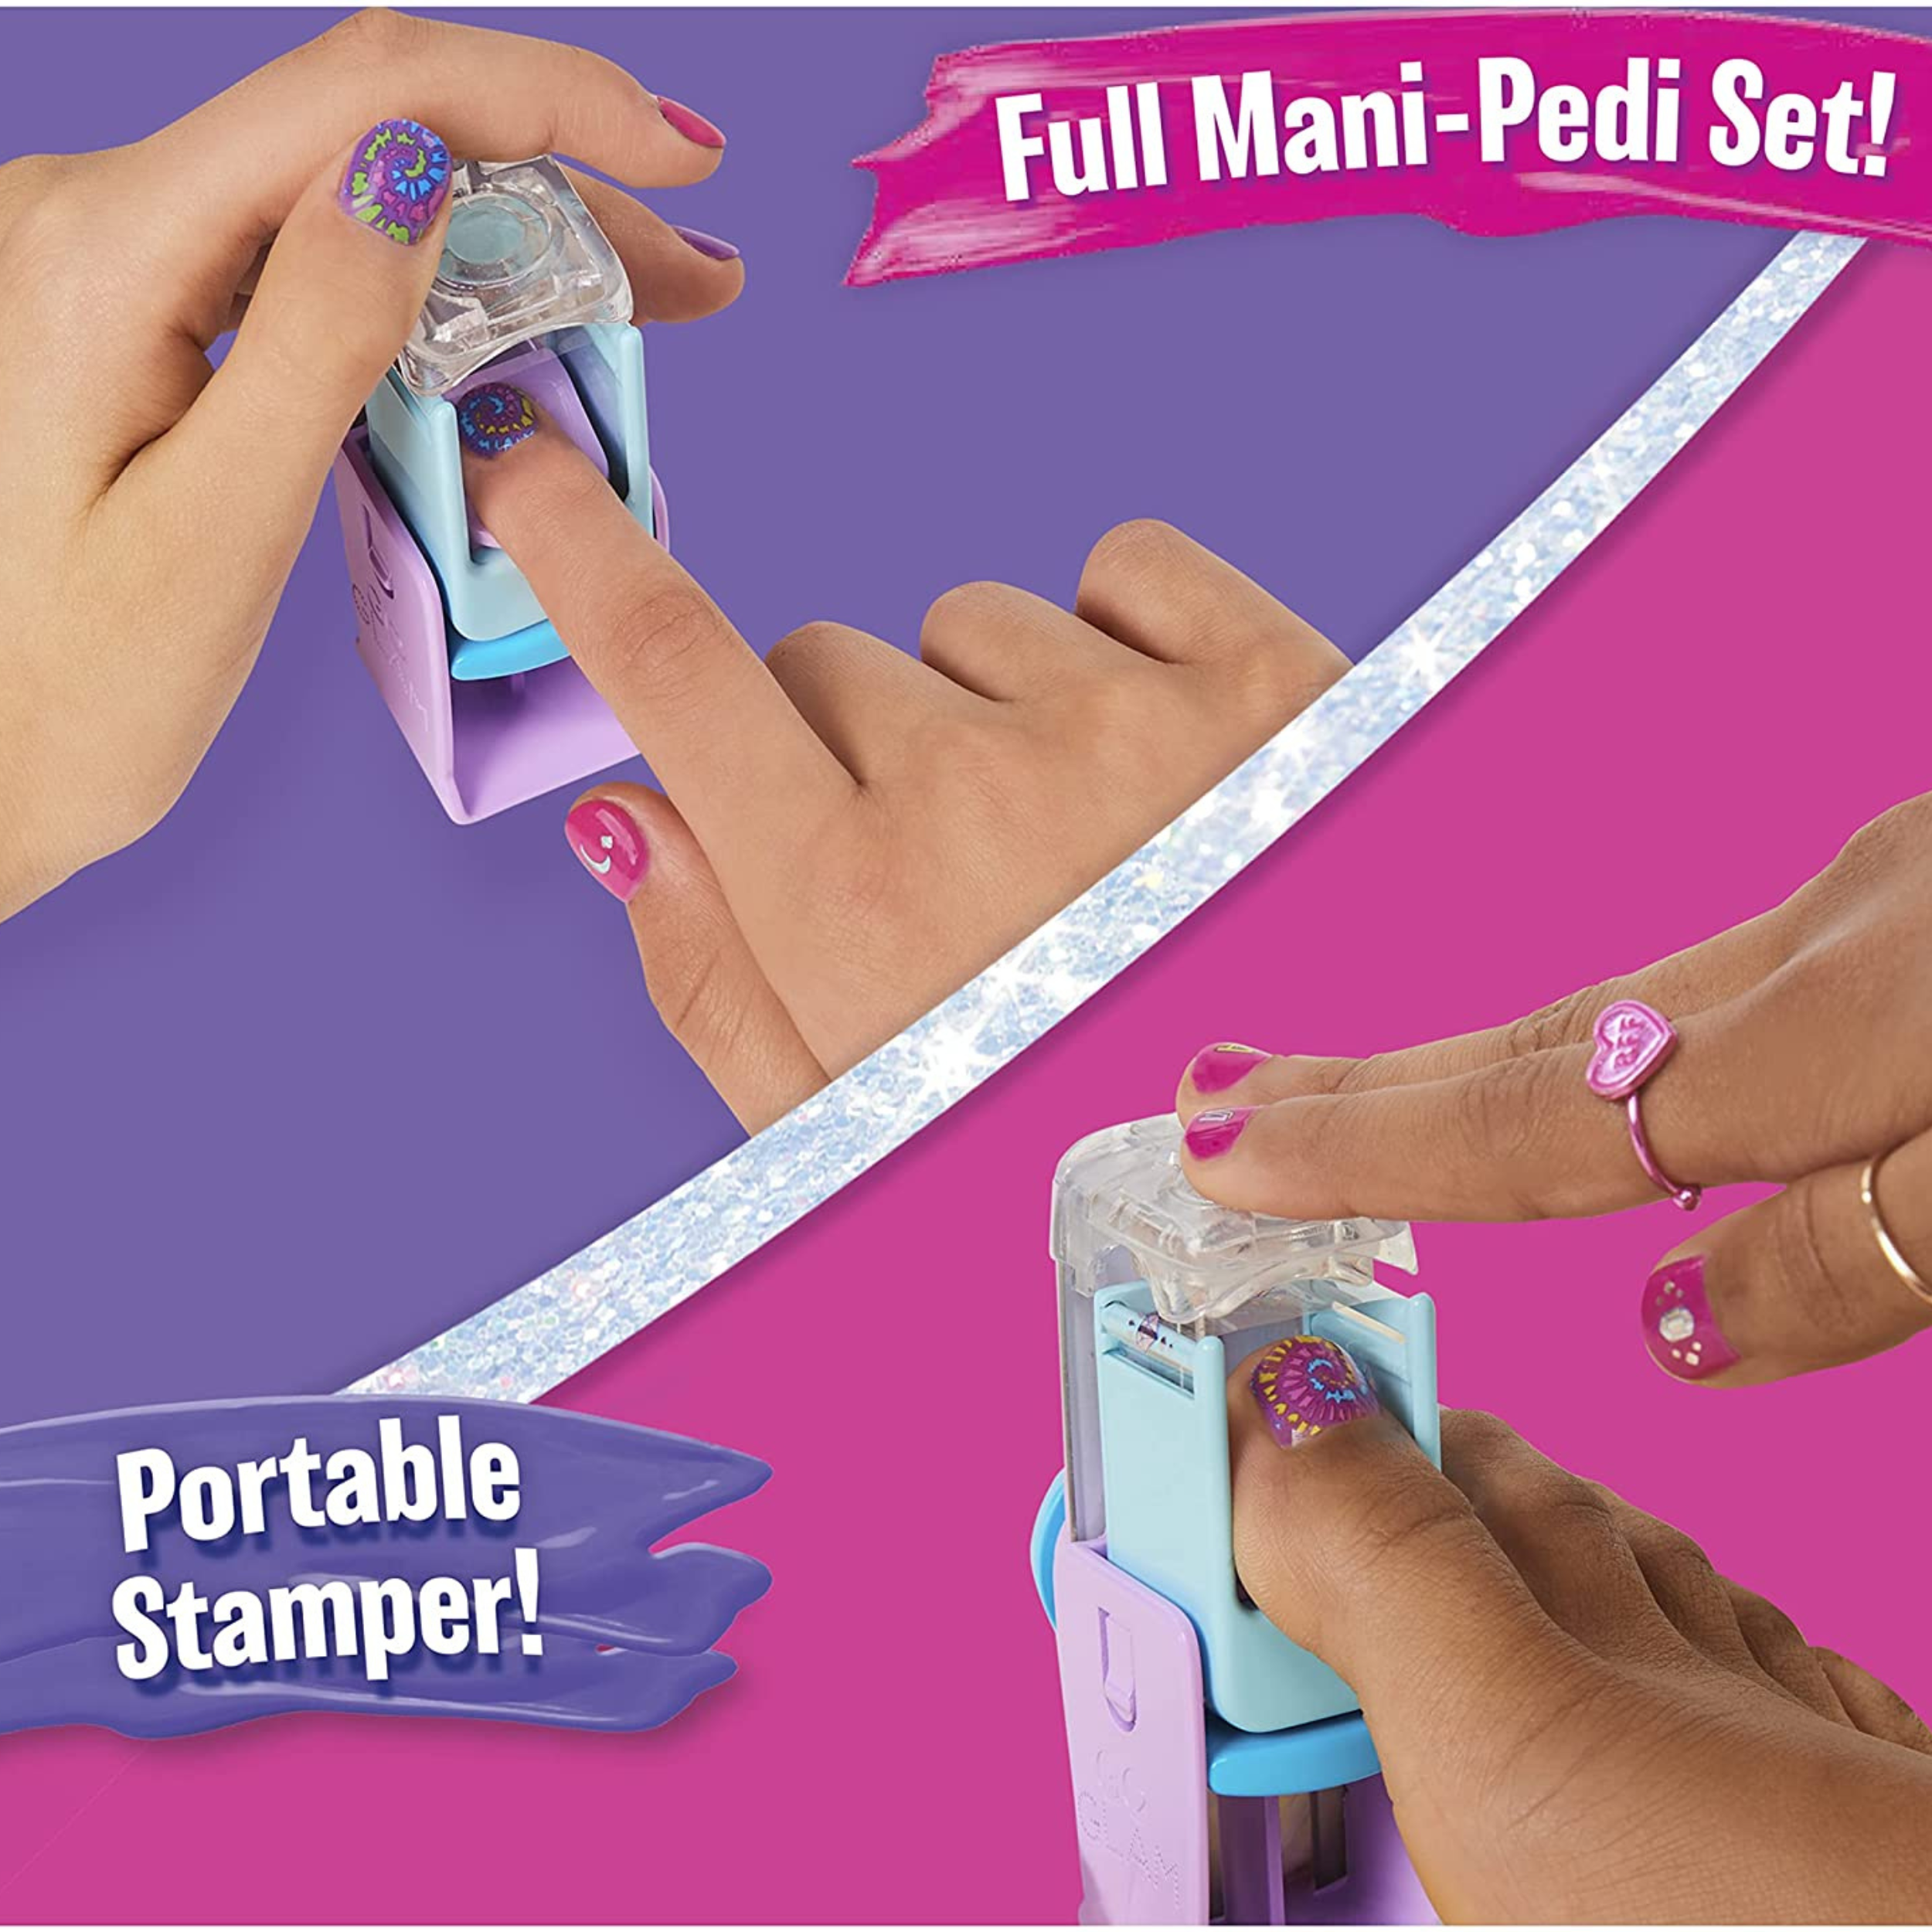 APPYTOYS  Spin Master - Cool Maker Glamour Gear